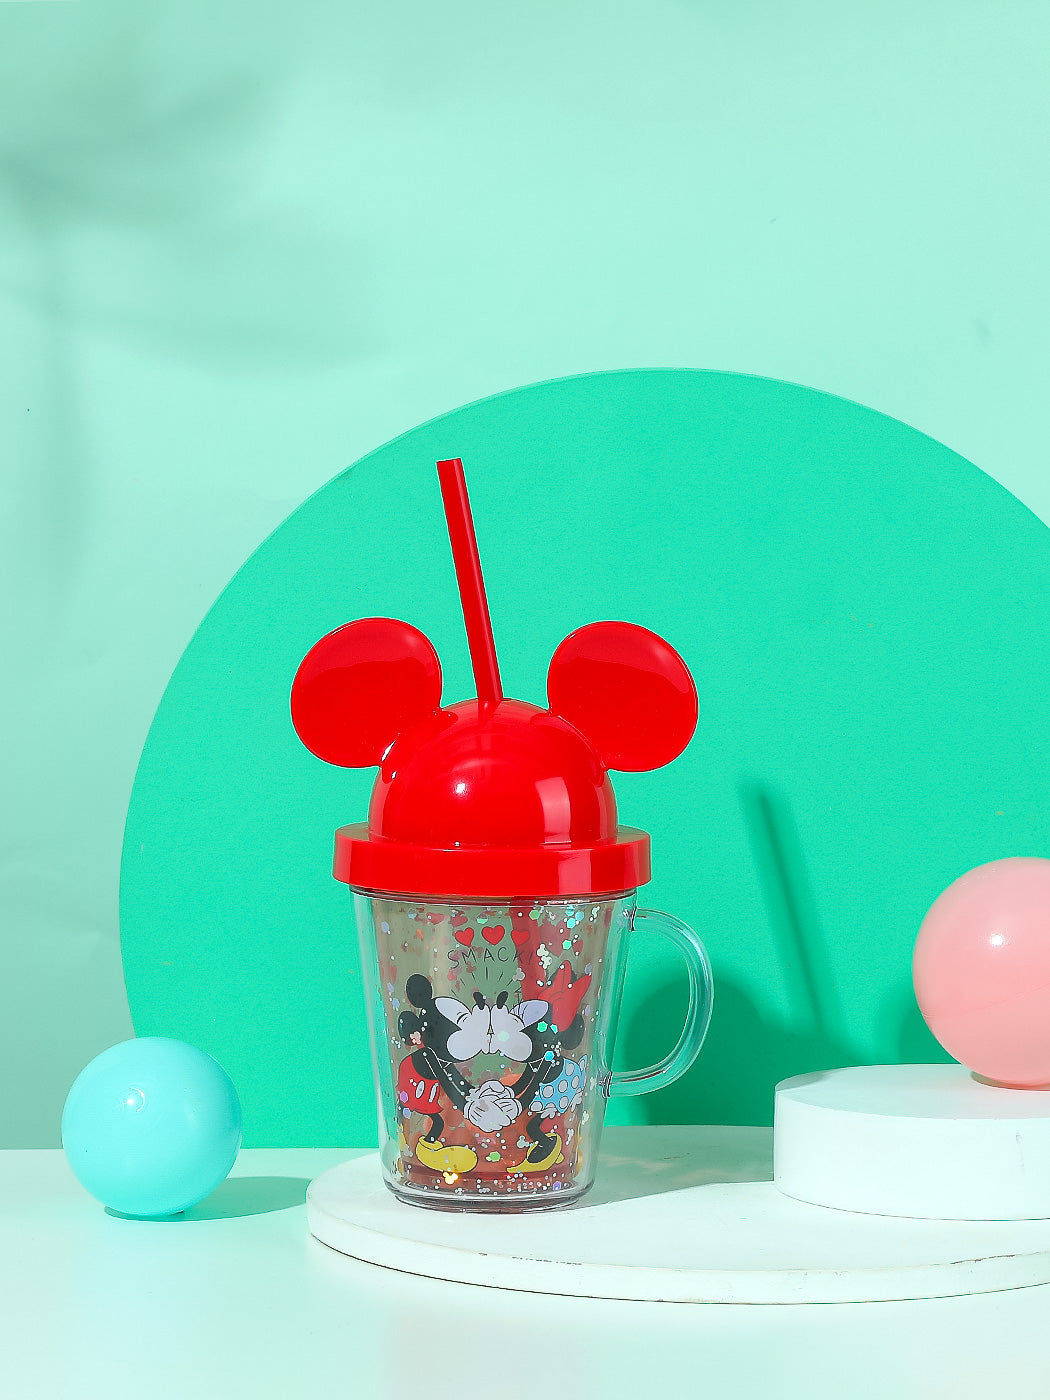 MINISO MICKEY MOUSE COLLECTION STRAW MUG WITH LID 280ML 2008484210104 PLASTIC WATER BOTTLE